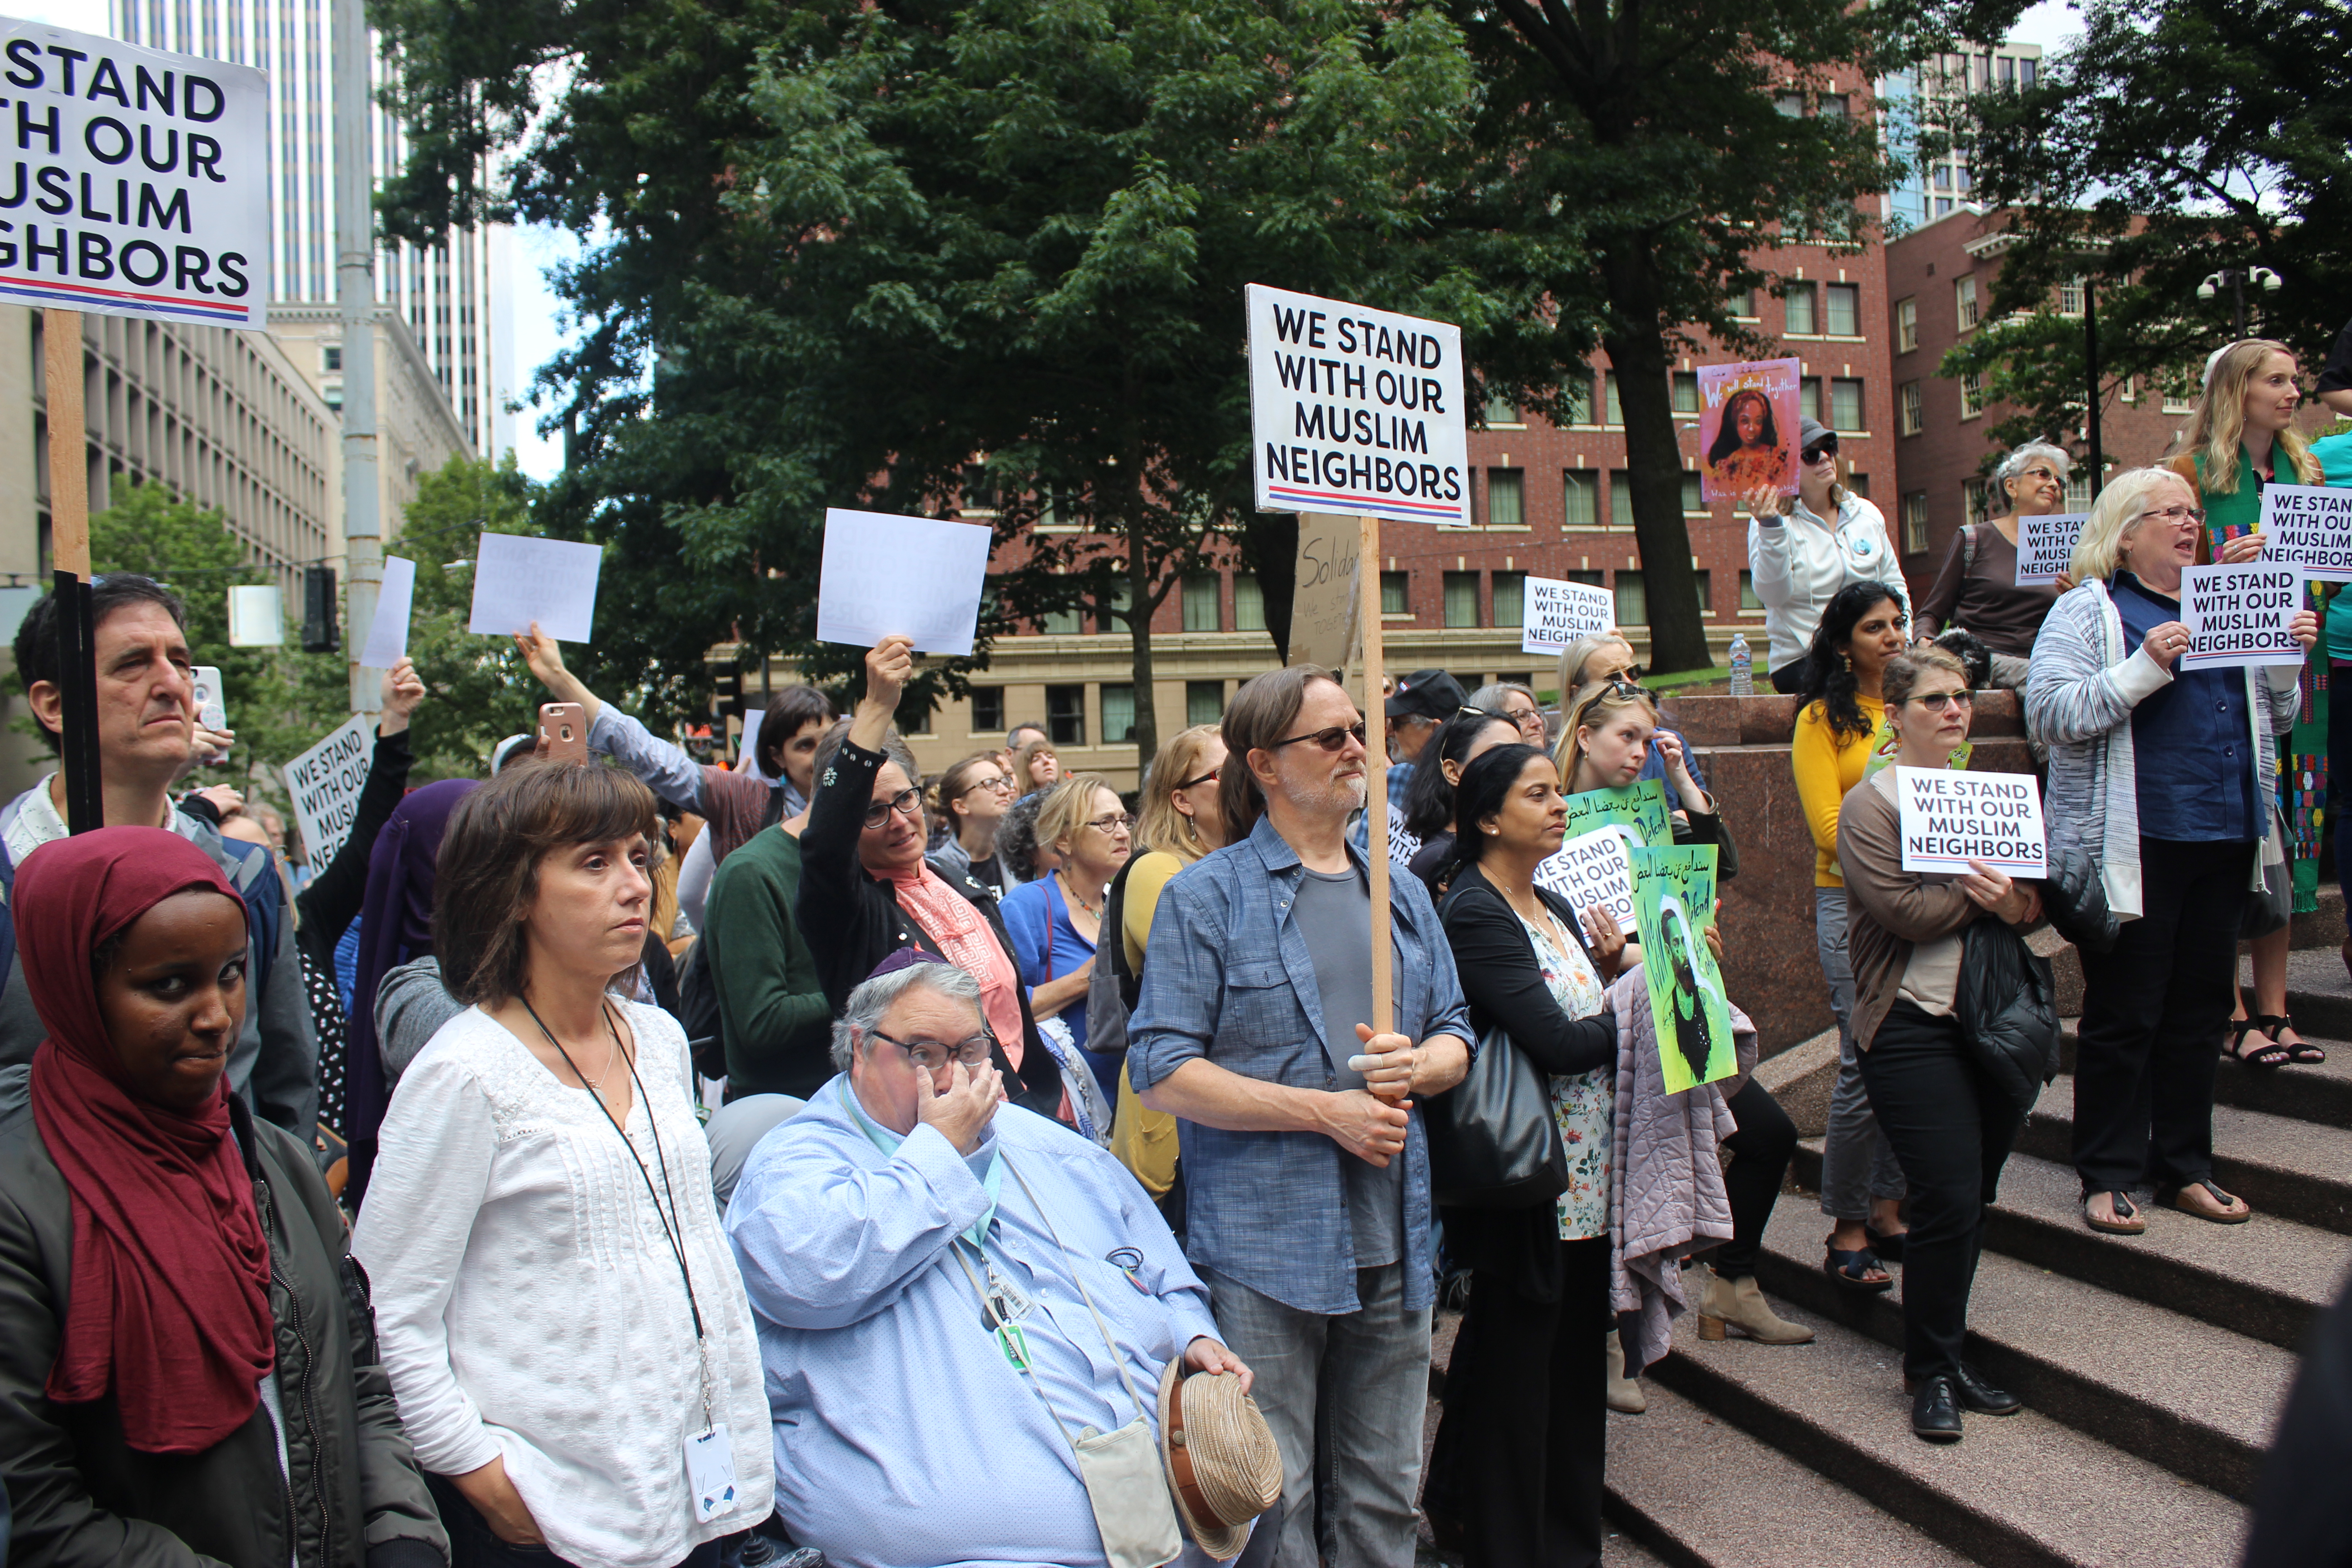 A crowd gathered in front of the US Courthouse in downtown Seattle to show support for the Muslim Community on June 26, 2018 (Photo by Cathy You)